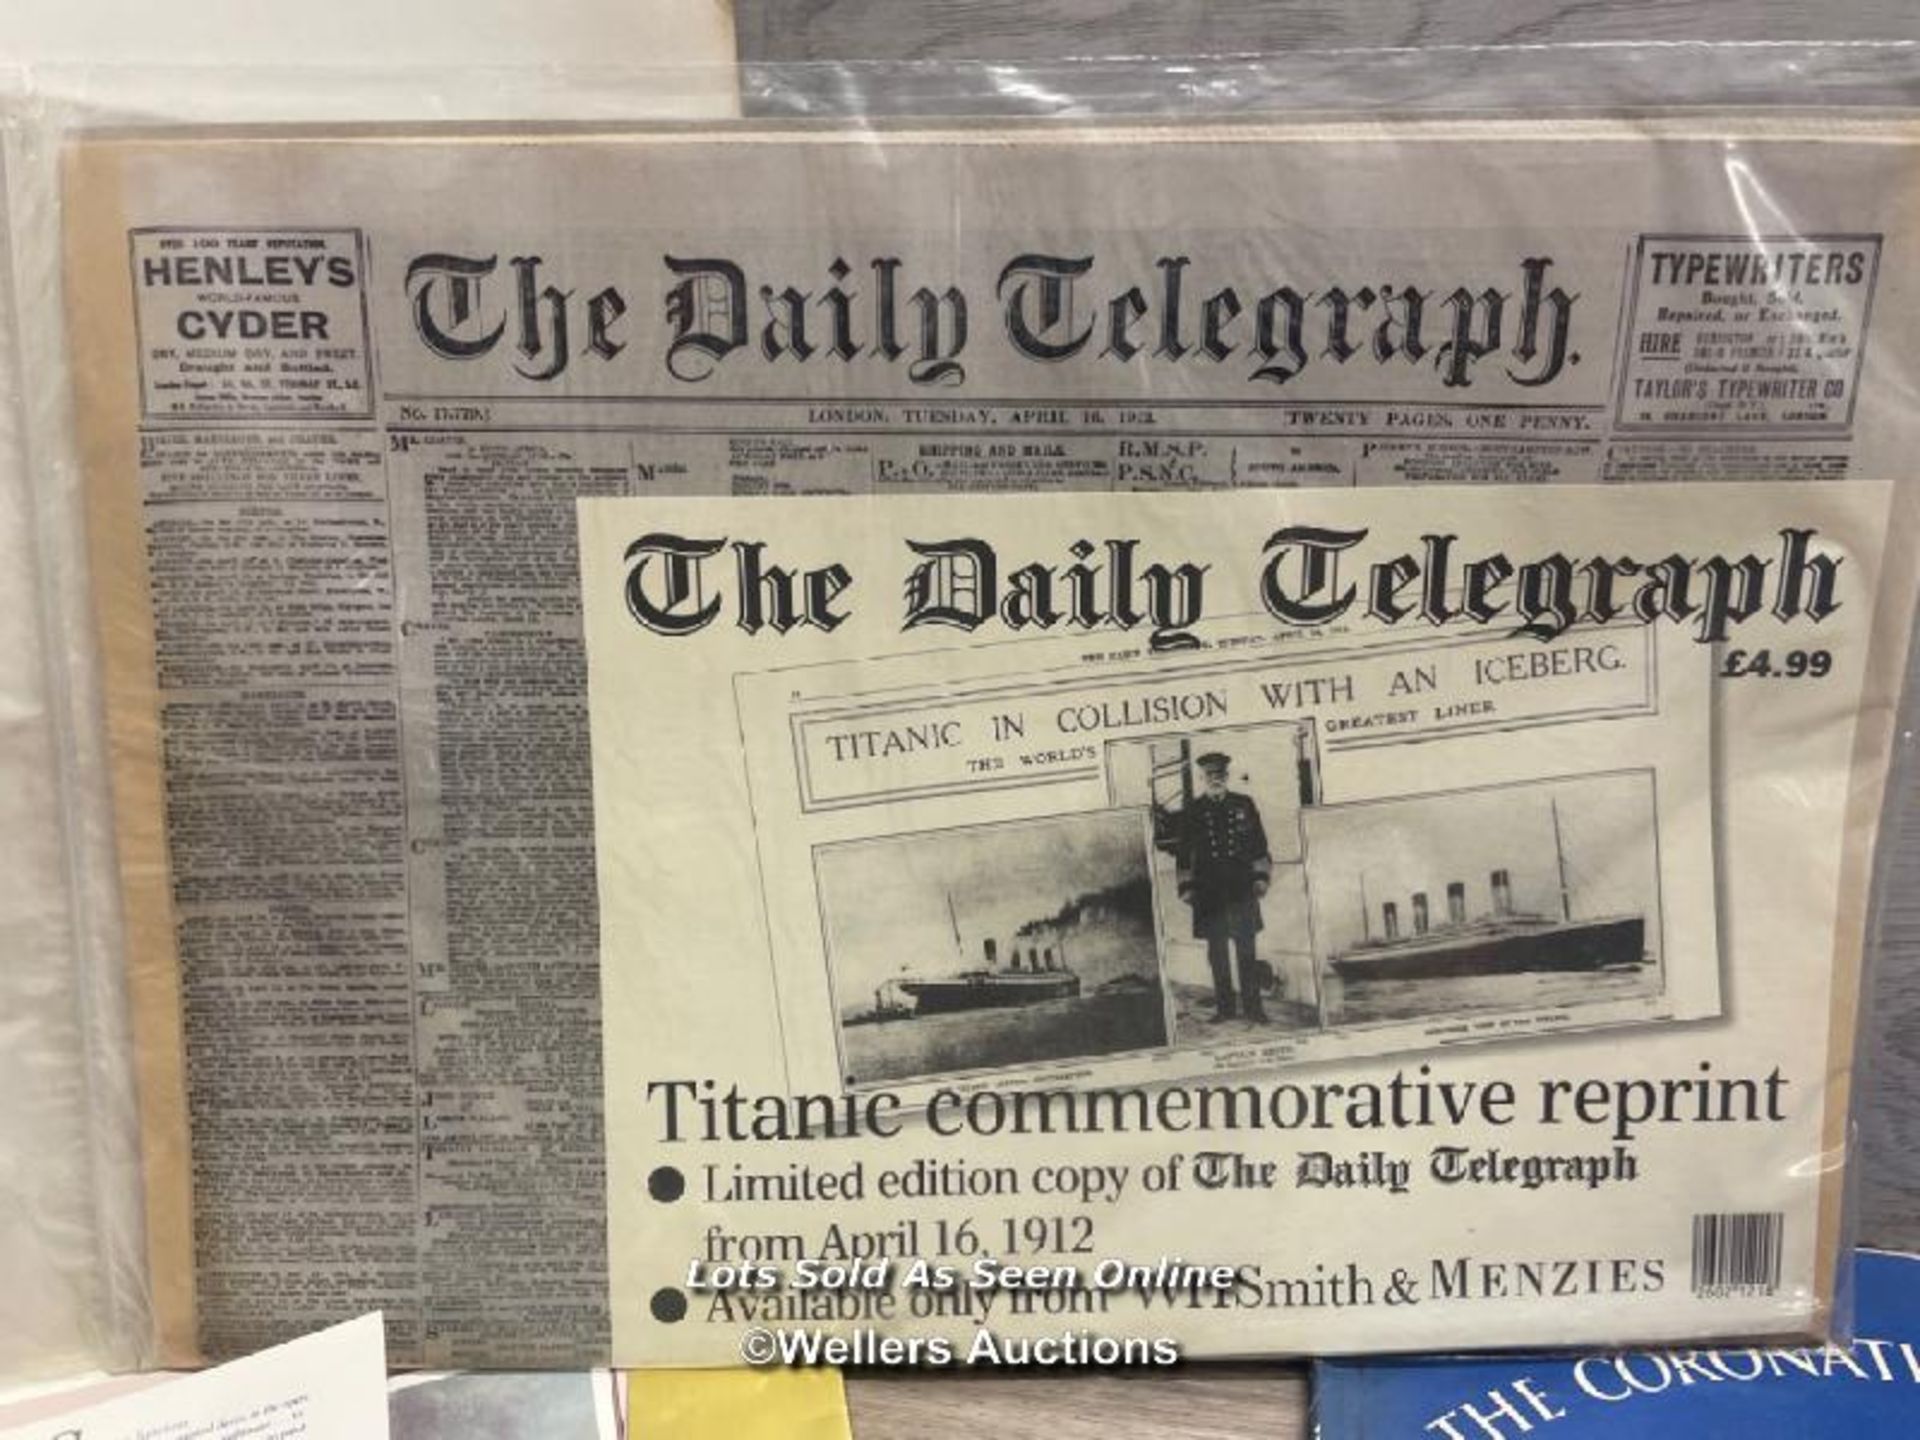 A PORTFOLO OF CUNEO RAILWAY PRINTS, REPRODUCTION TITANIC DAILY TELEGRAPH NEWSPAPER AND CORONATION - Image 5 of 6